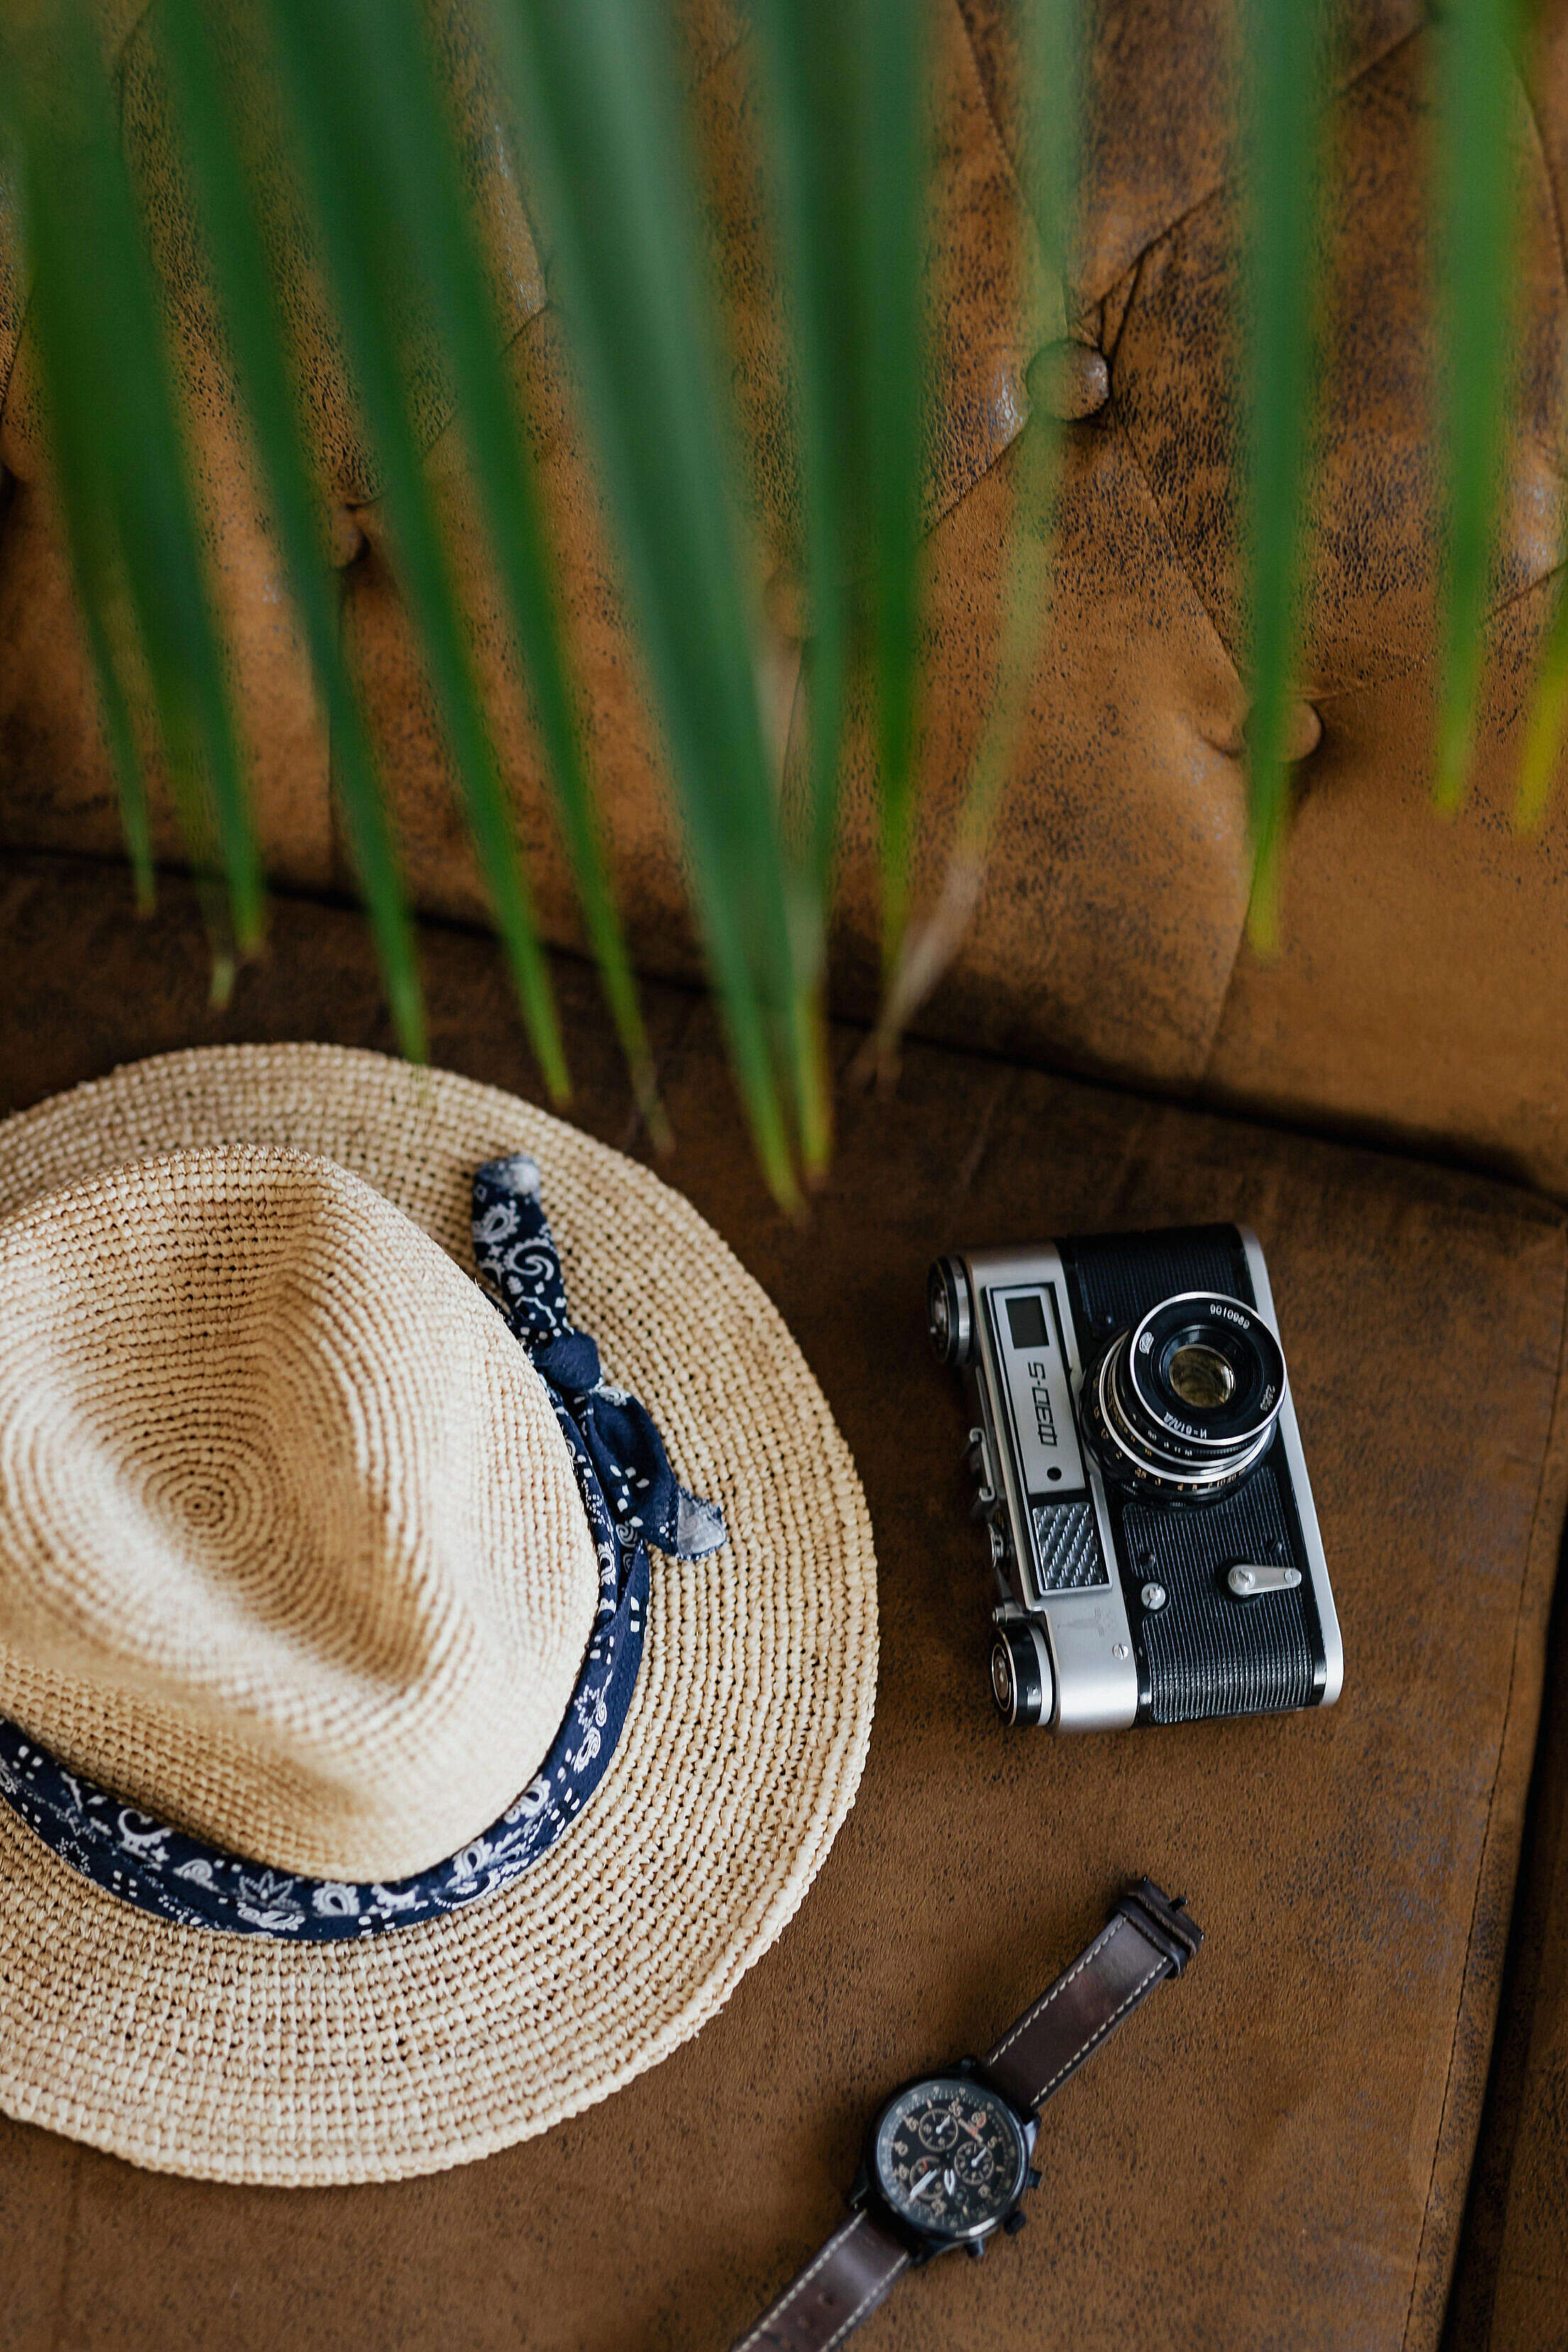 Summer Travel Mood Photo Straw Hat with Analog Camera and Watch Free Stock Photo